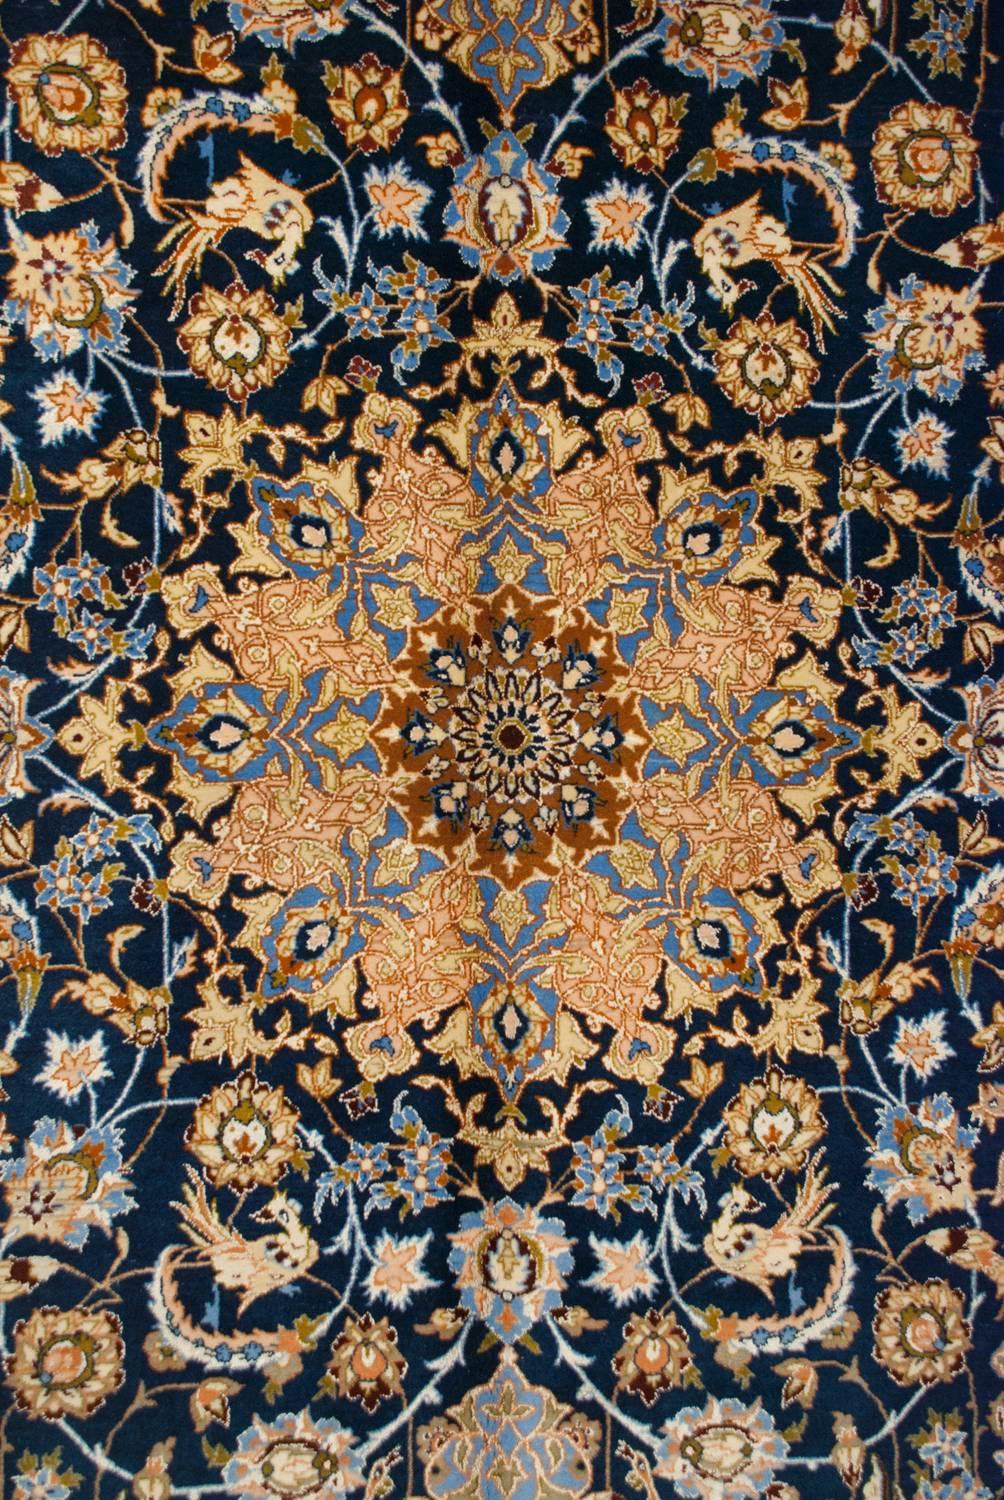 A wonderful whimsical early 20th century Persian Isfahan rug with a mesmerizing pattern of intricately and tightly woven pattern of multicolored floral and scrolling vines on a rich indigo background. Amidst the floral pattern are myriad animals